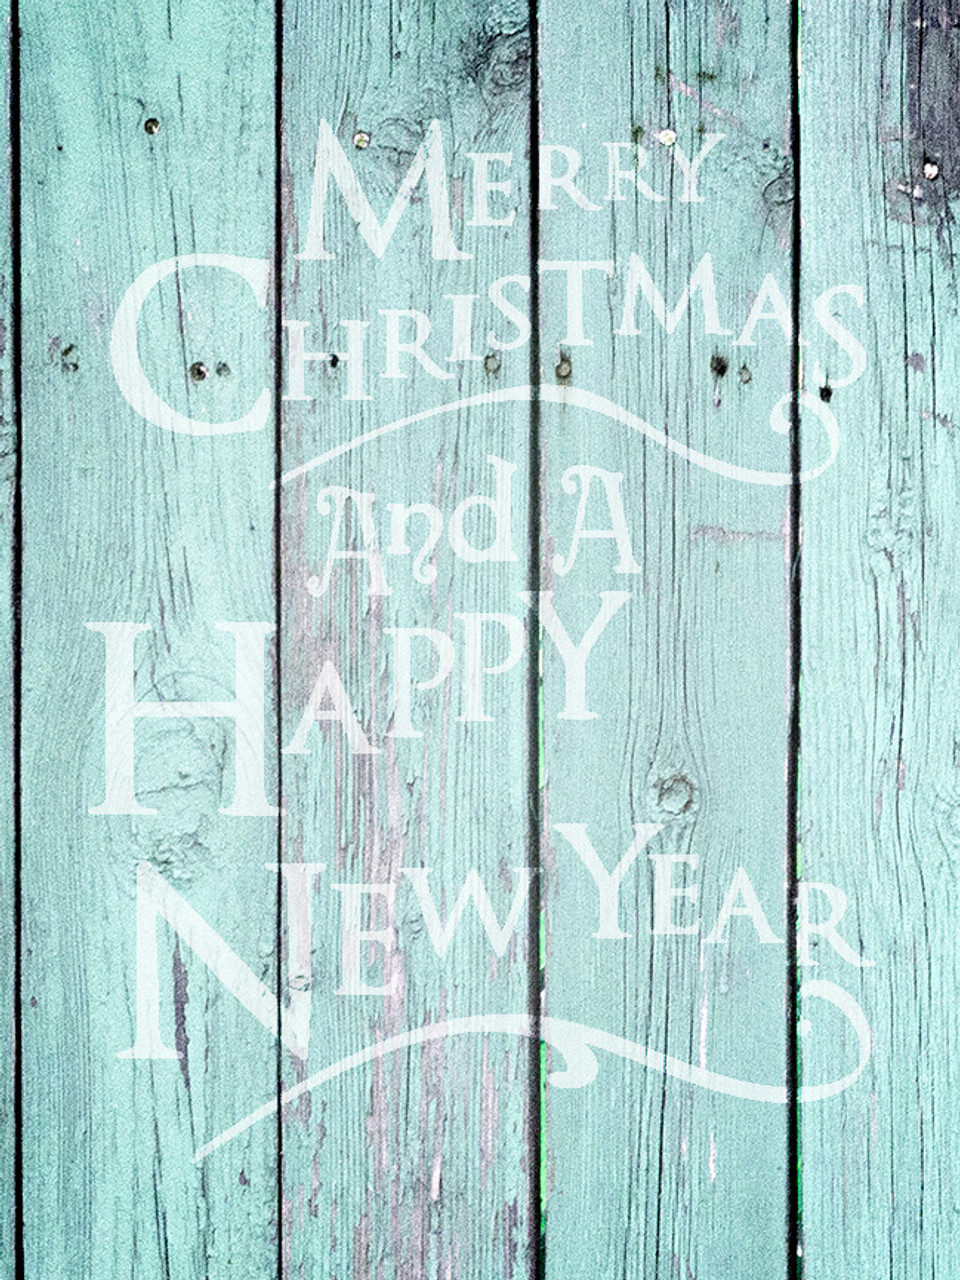 Merry Christmas And Happy New Year - Festive - Word Art Stencil - 13" x 16" - STCL2085_2 - by StudioR12